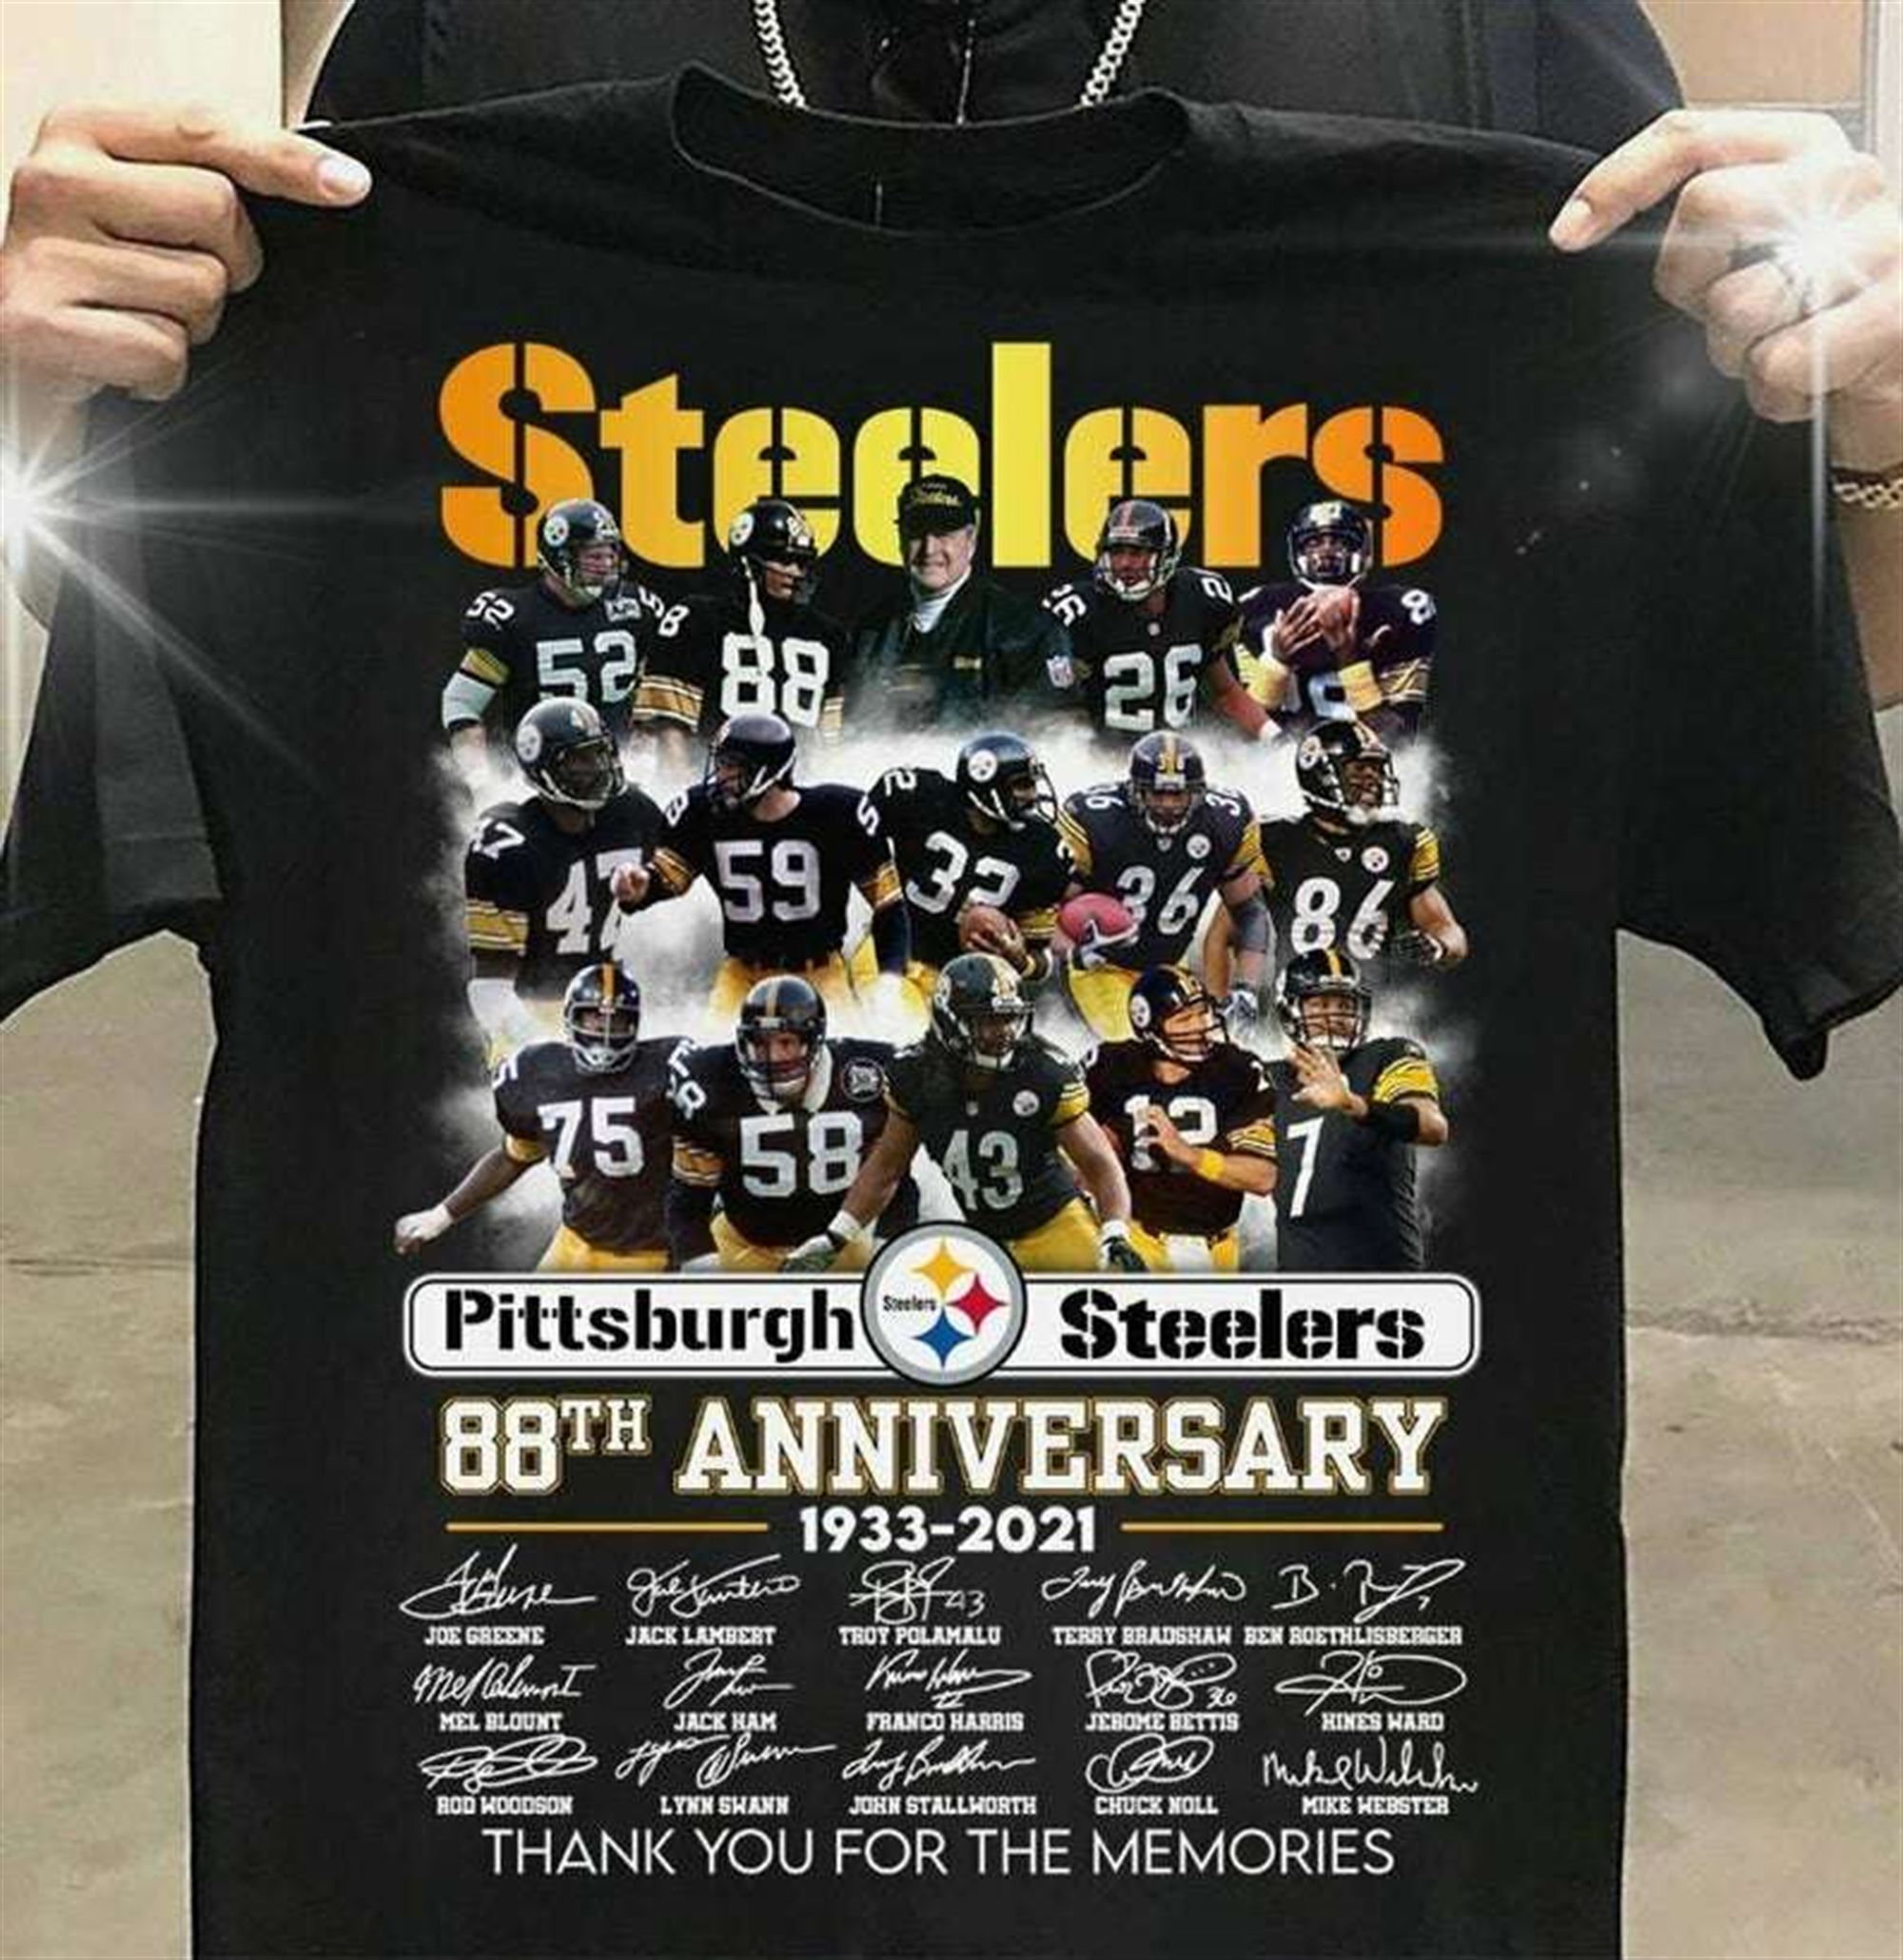 The Steelers 88th Anniversary 1993-2021 Signatures T-shirt Full Size Up To 5xl